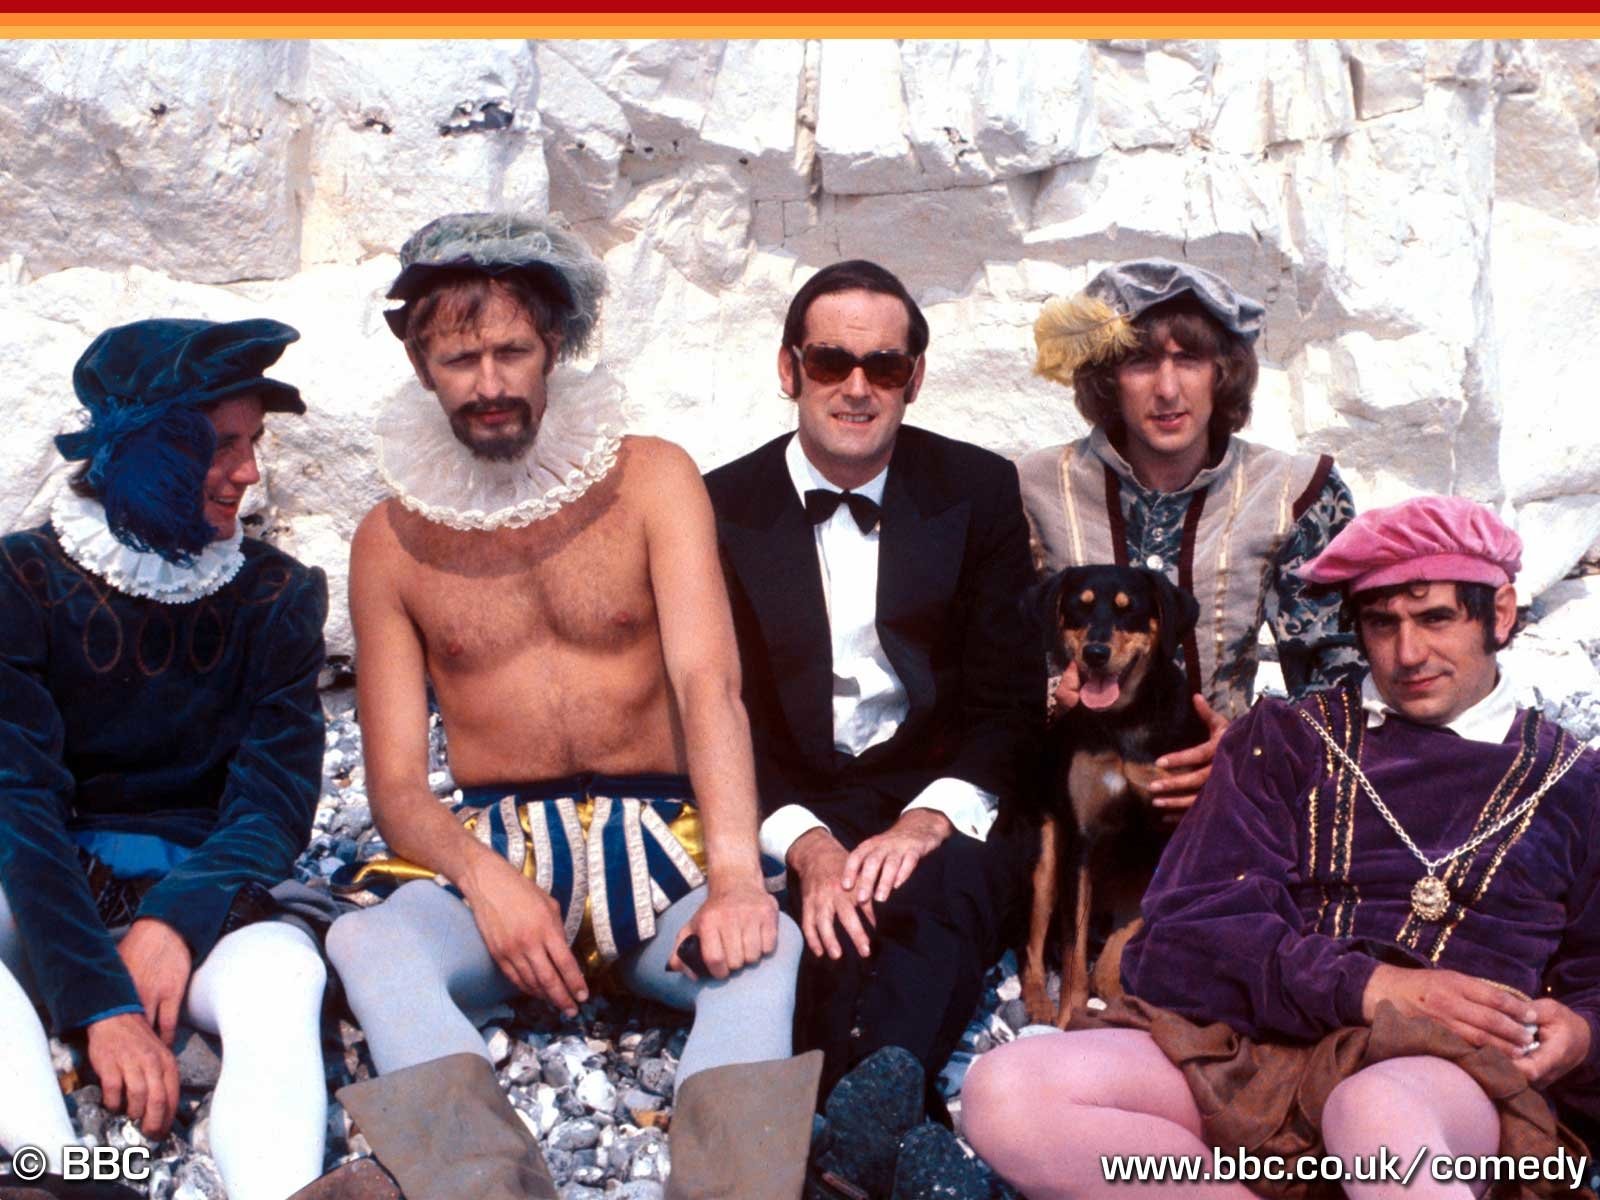 Monty Python'S Flying Circus Wallpapers